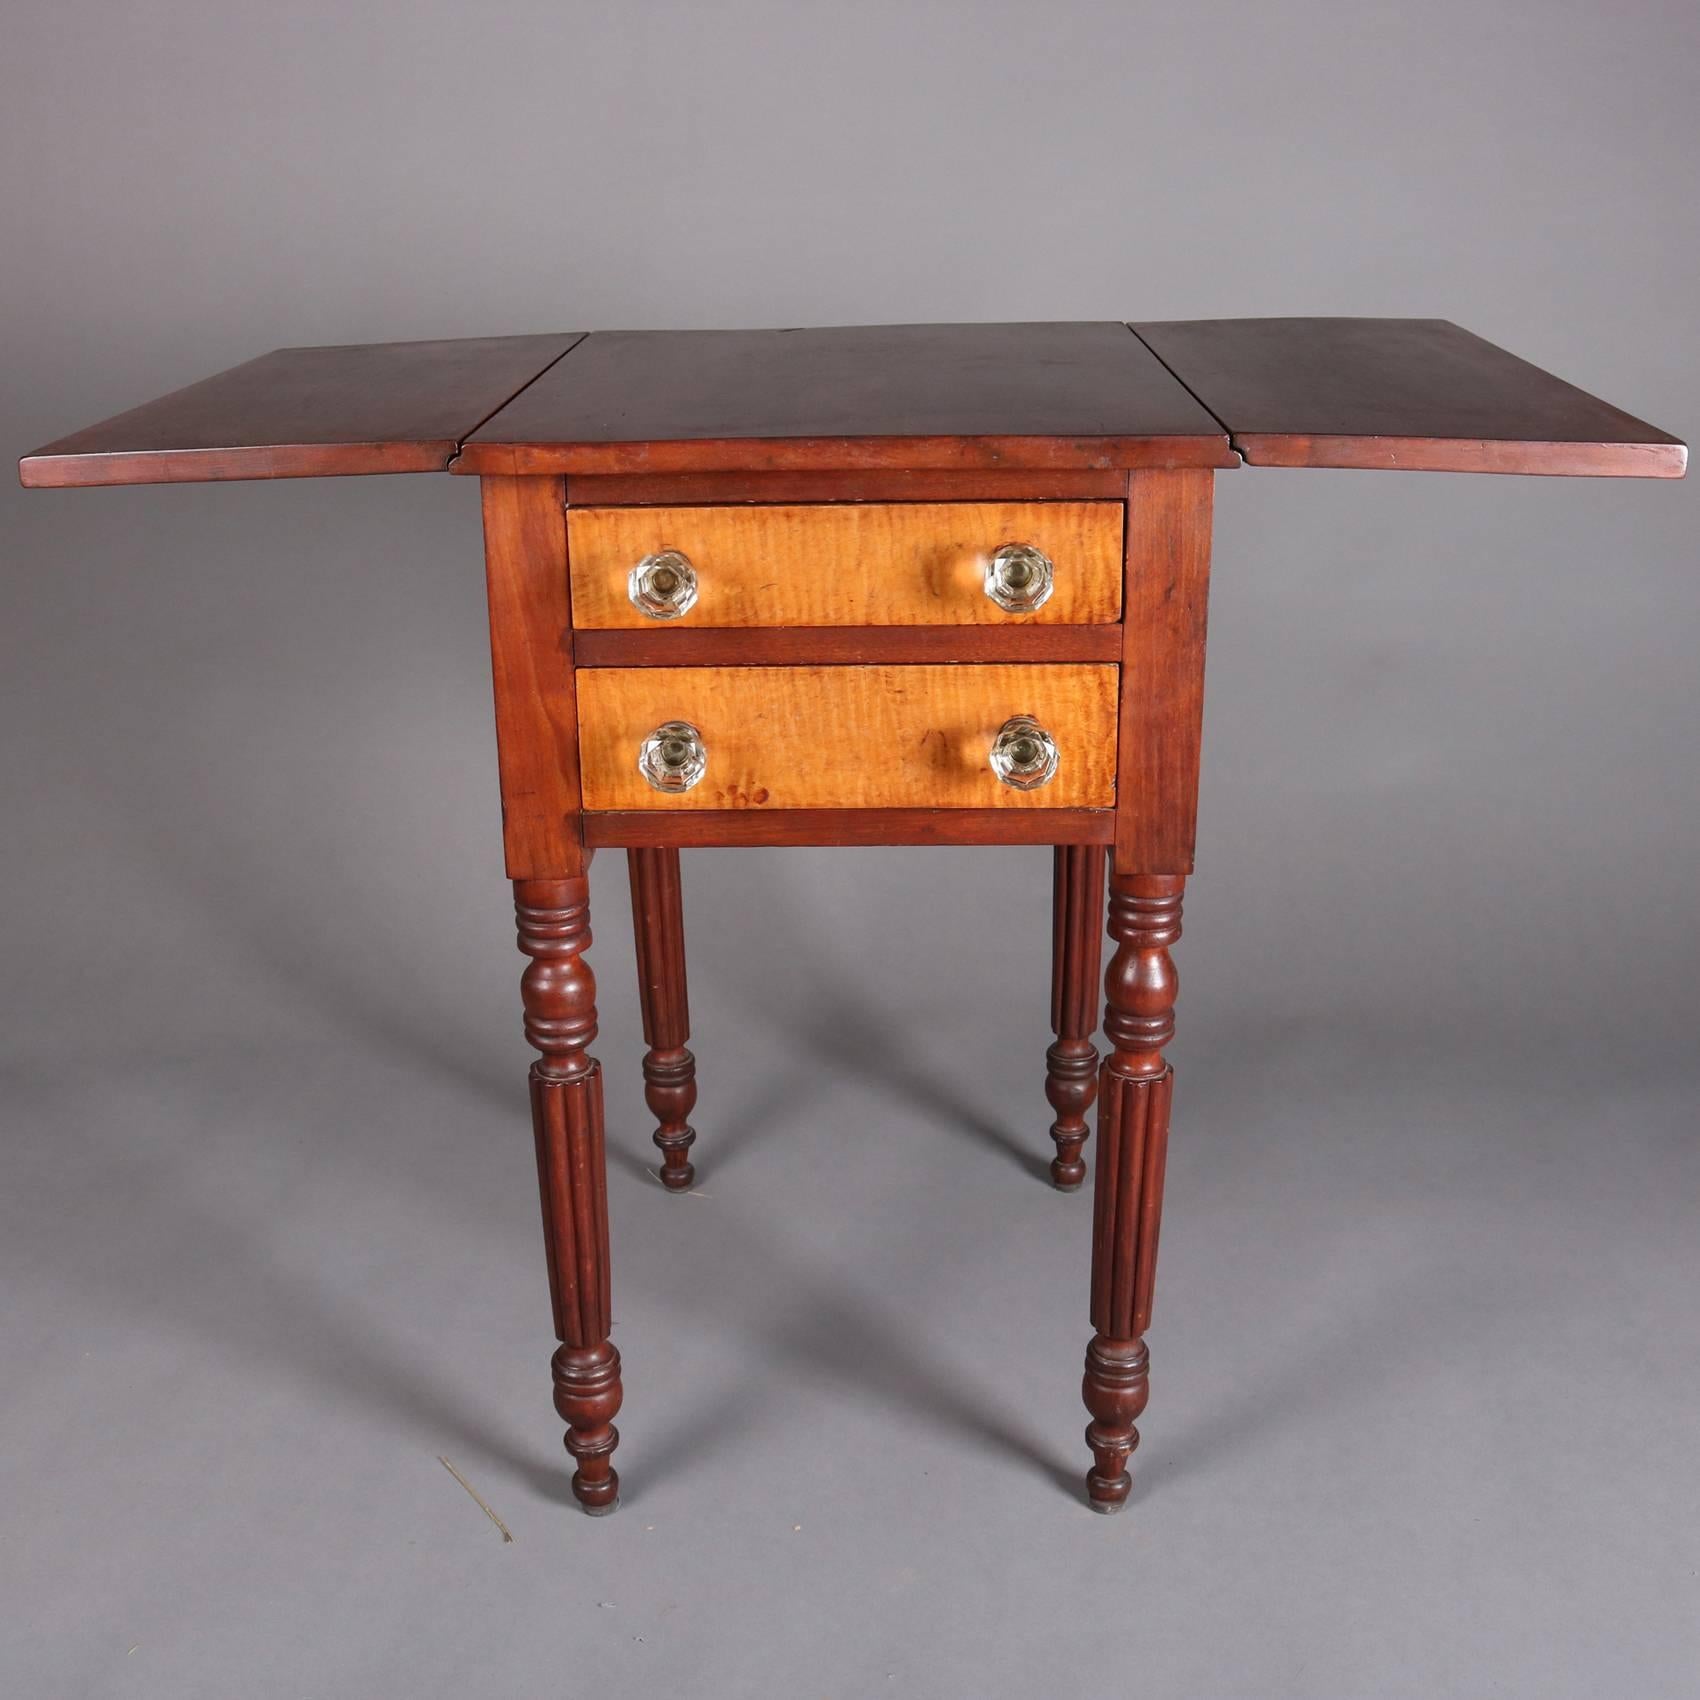 Molded Antique Sheraton Tiger Maple and Cherry Two-Drawer Drop Leaf Stand, 19th Century